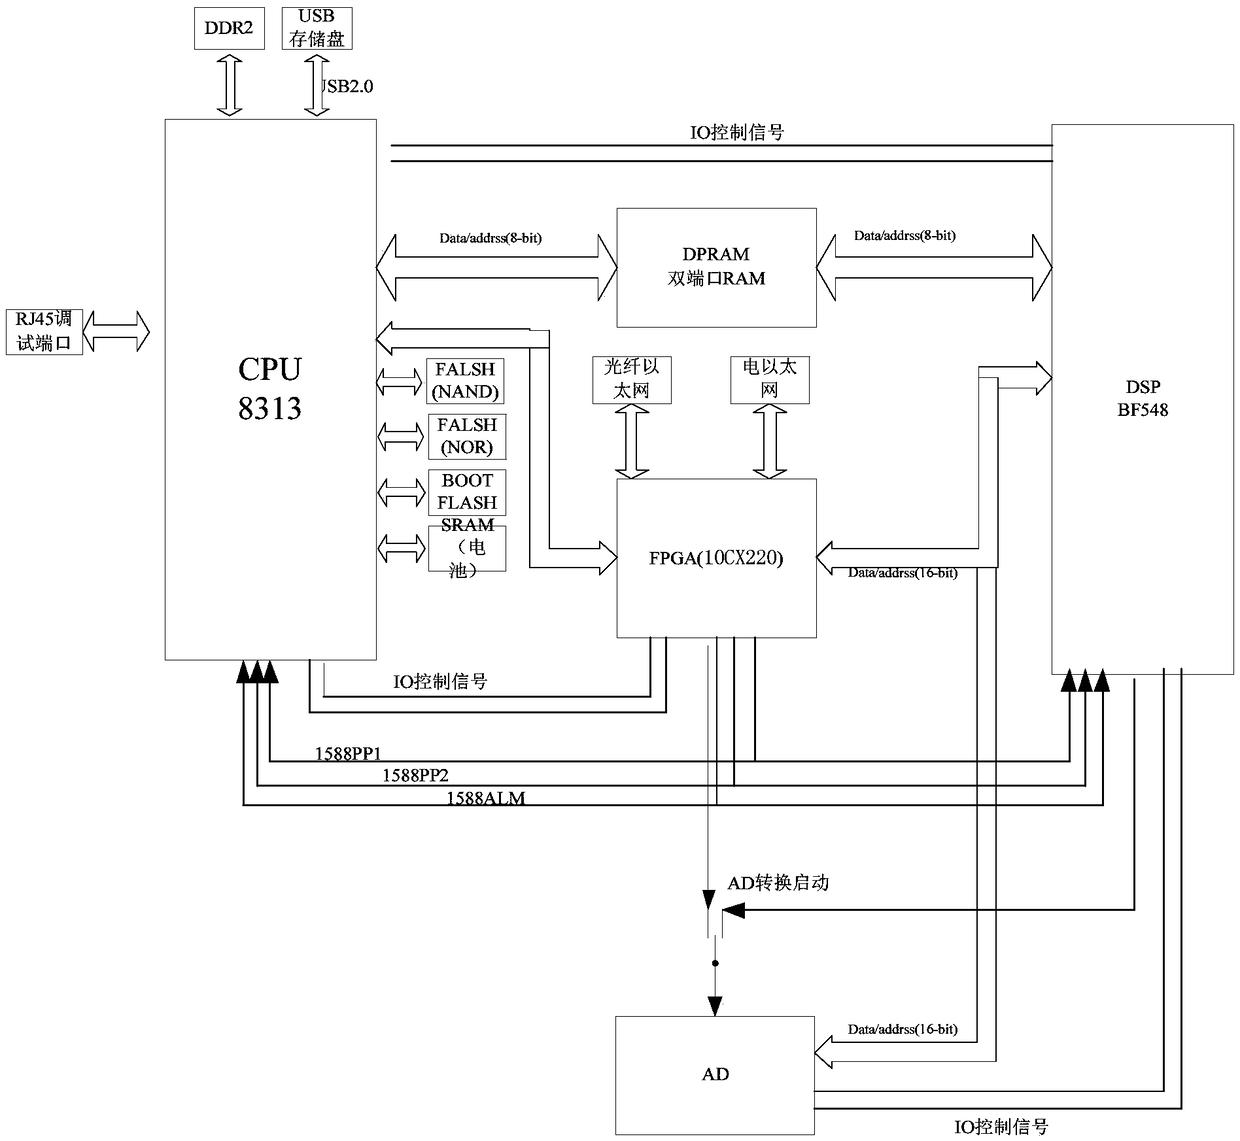 A method and apparatus for automatic power regulation of a power grid suitable for open-loop power supply based on depth-first search of a strongly connected component